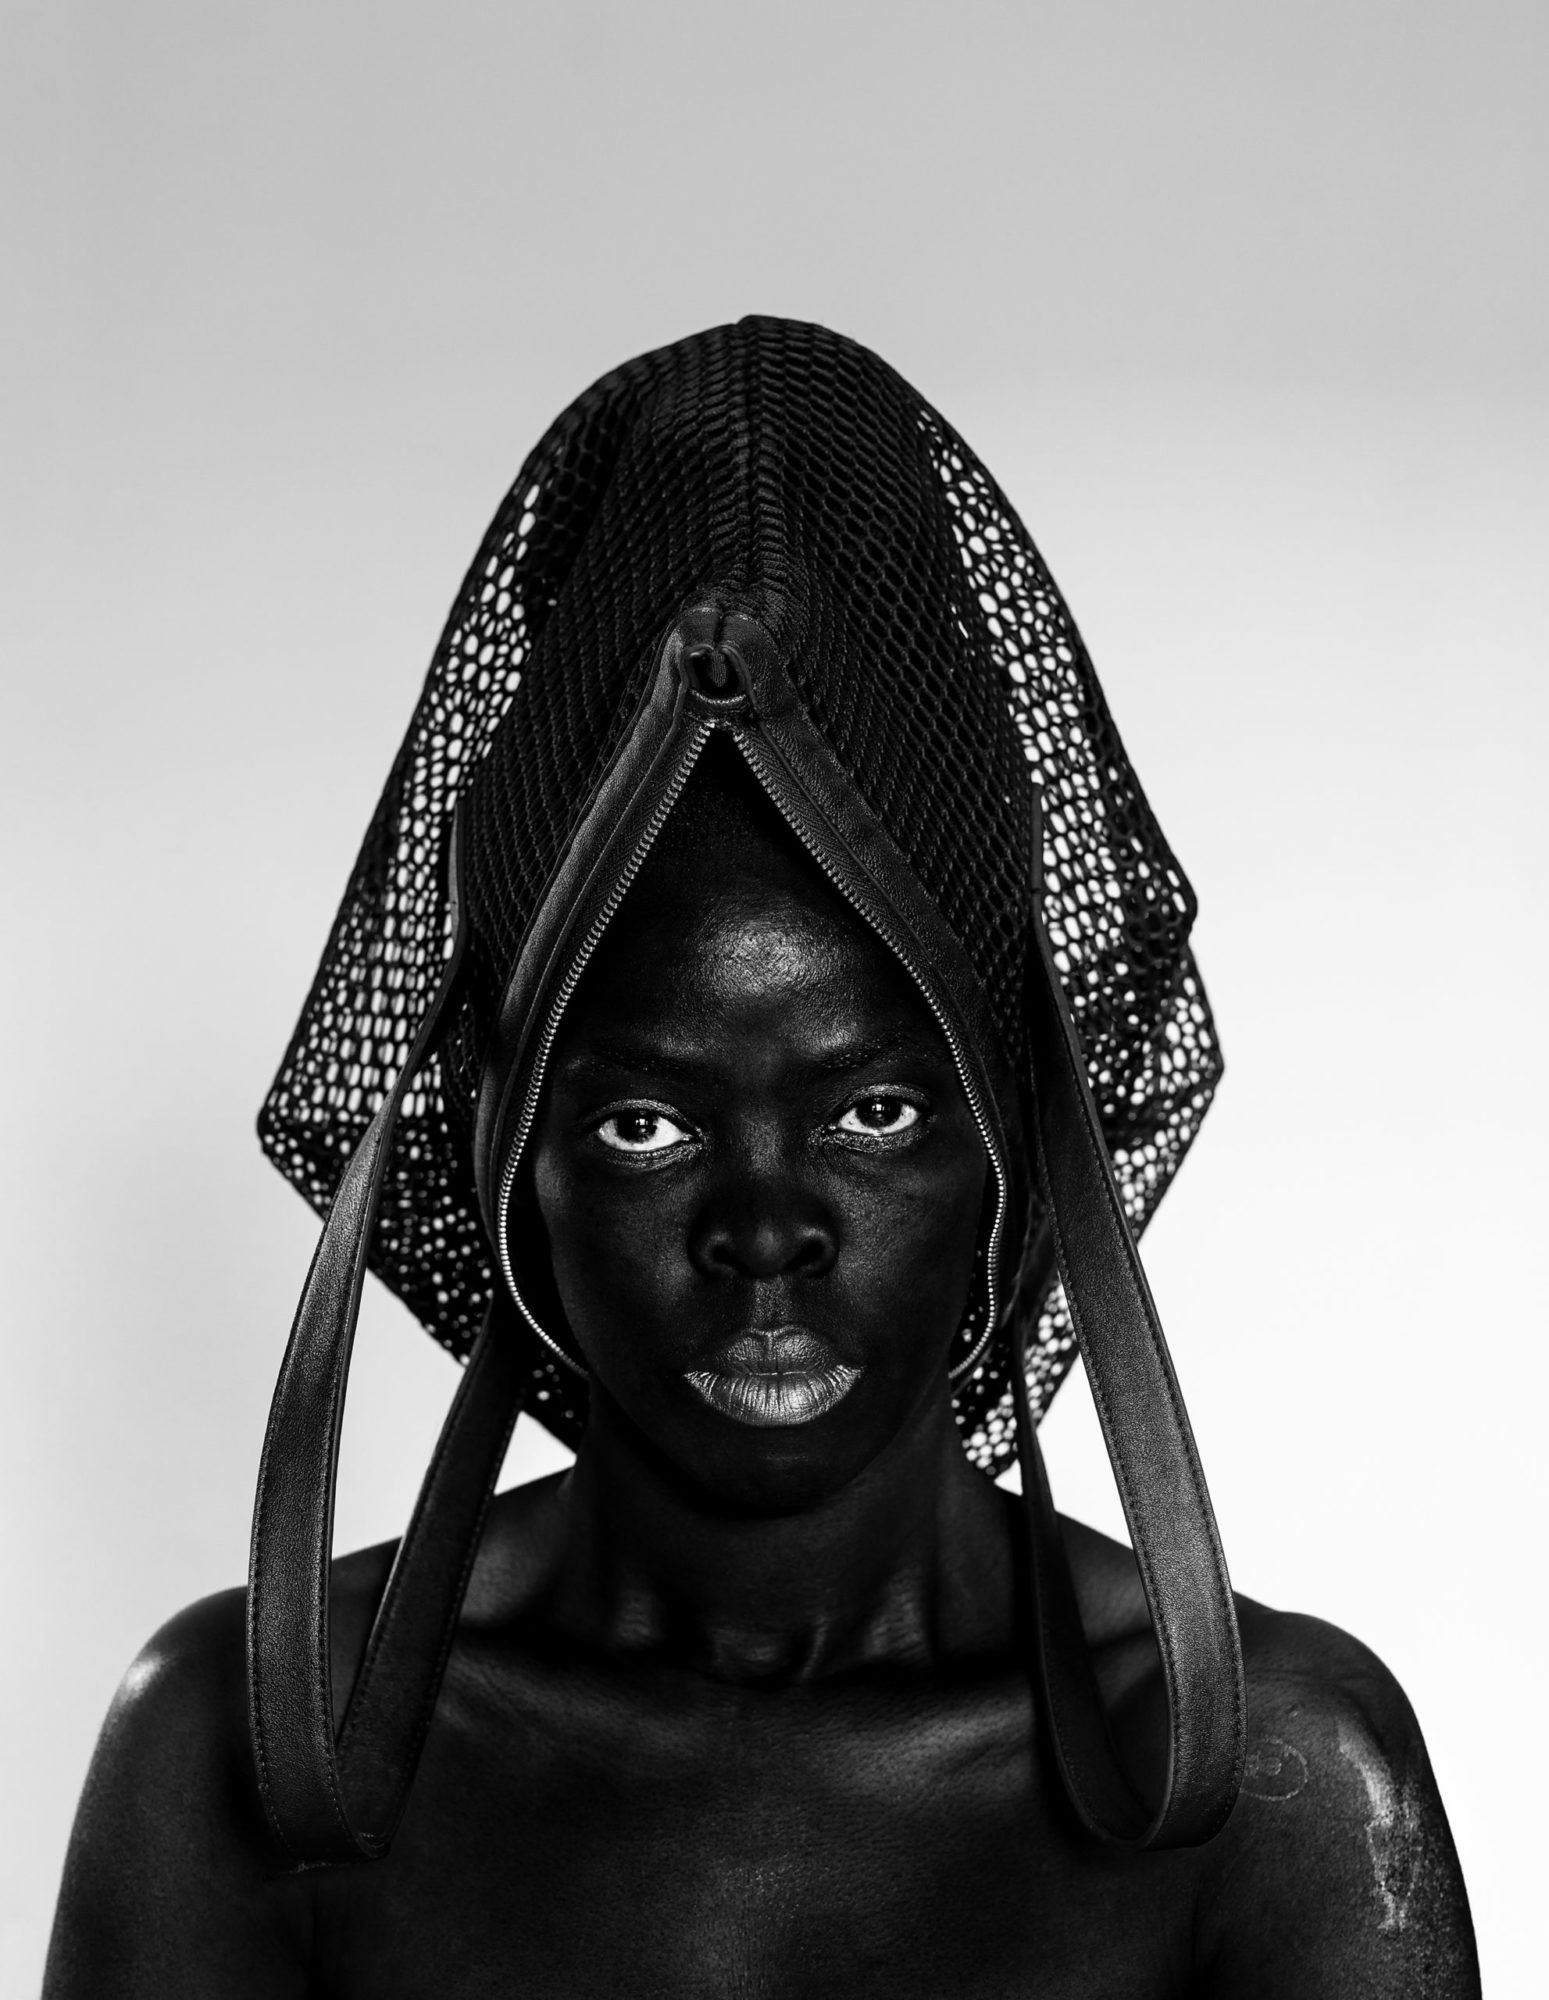 A black person with a woven headpiece stares directly out at the viewer against a very pale gray background